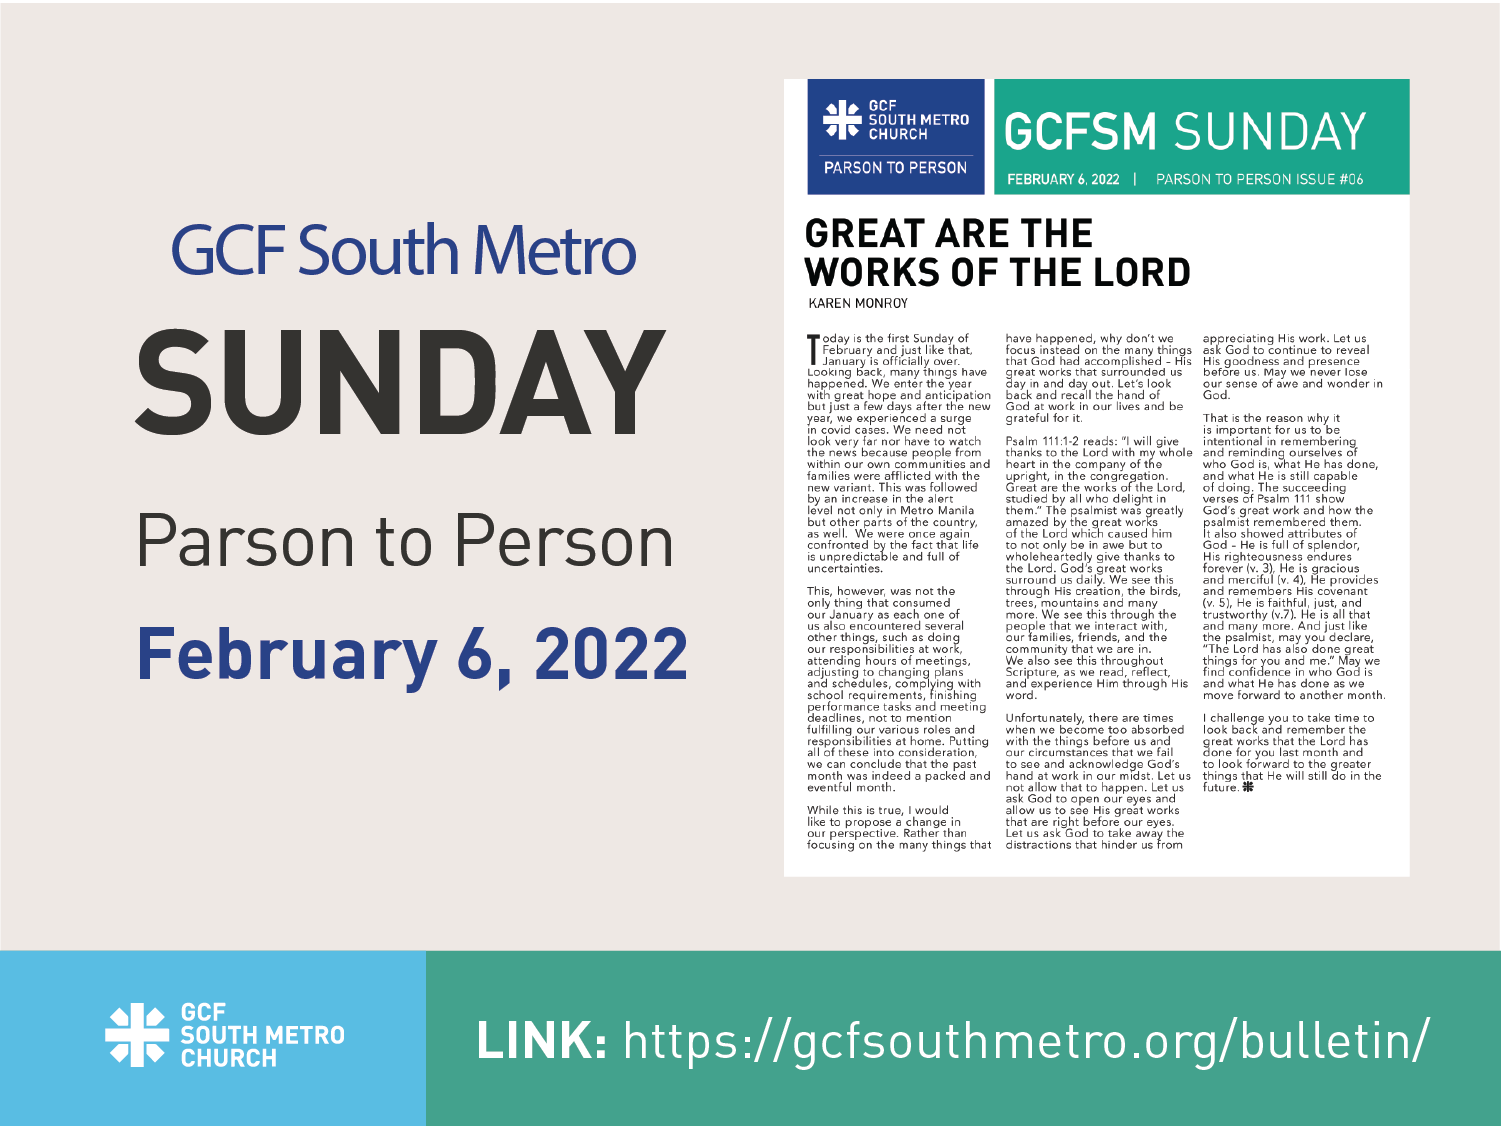 Sunday Bulletin – Parson to Person, February 6, 2022